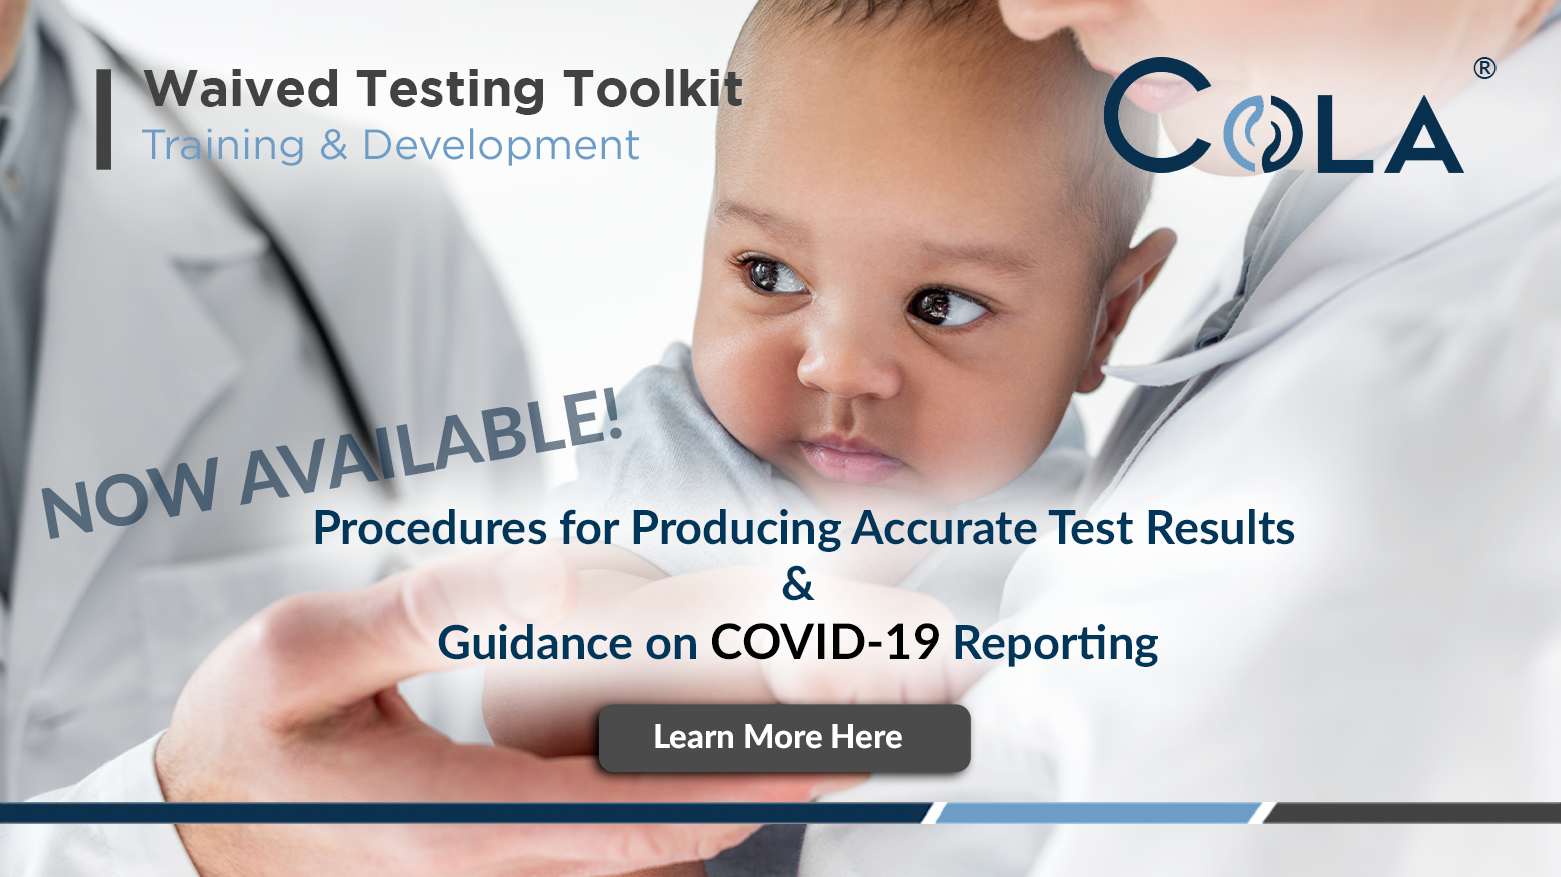 COLA launches new toolkit for waived laboratories with guidance on COVID-19 reporting